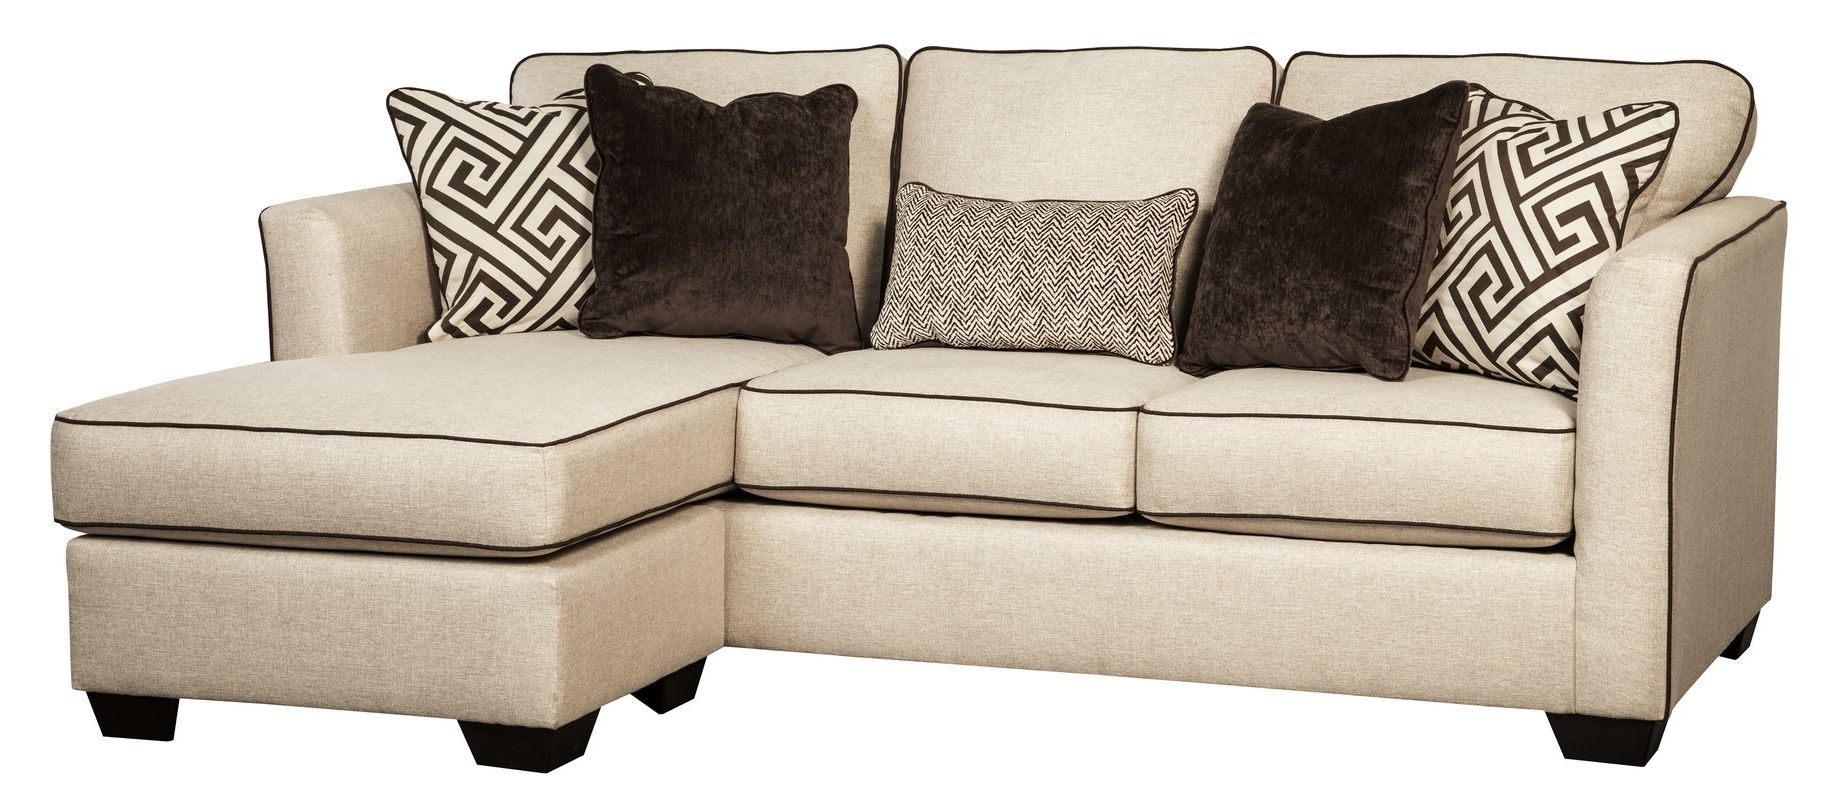 Wayfair Within Newest Sleeper Sofa Chaises (View 1 of 15)